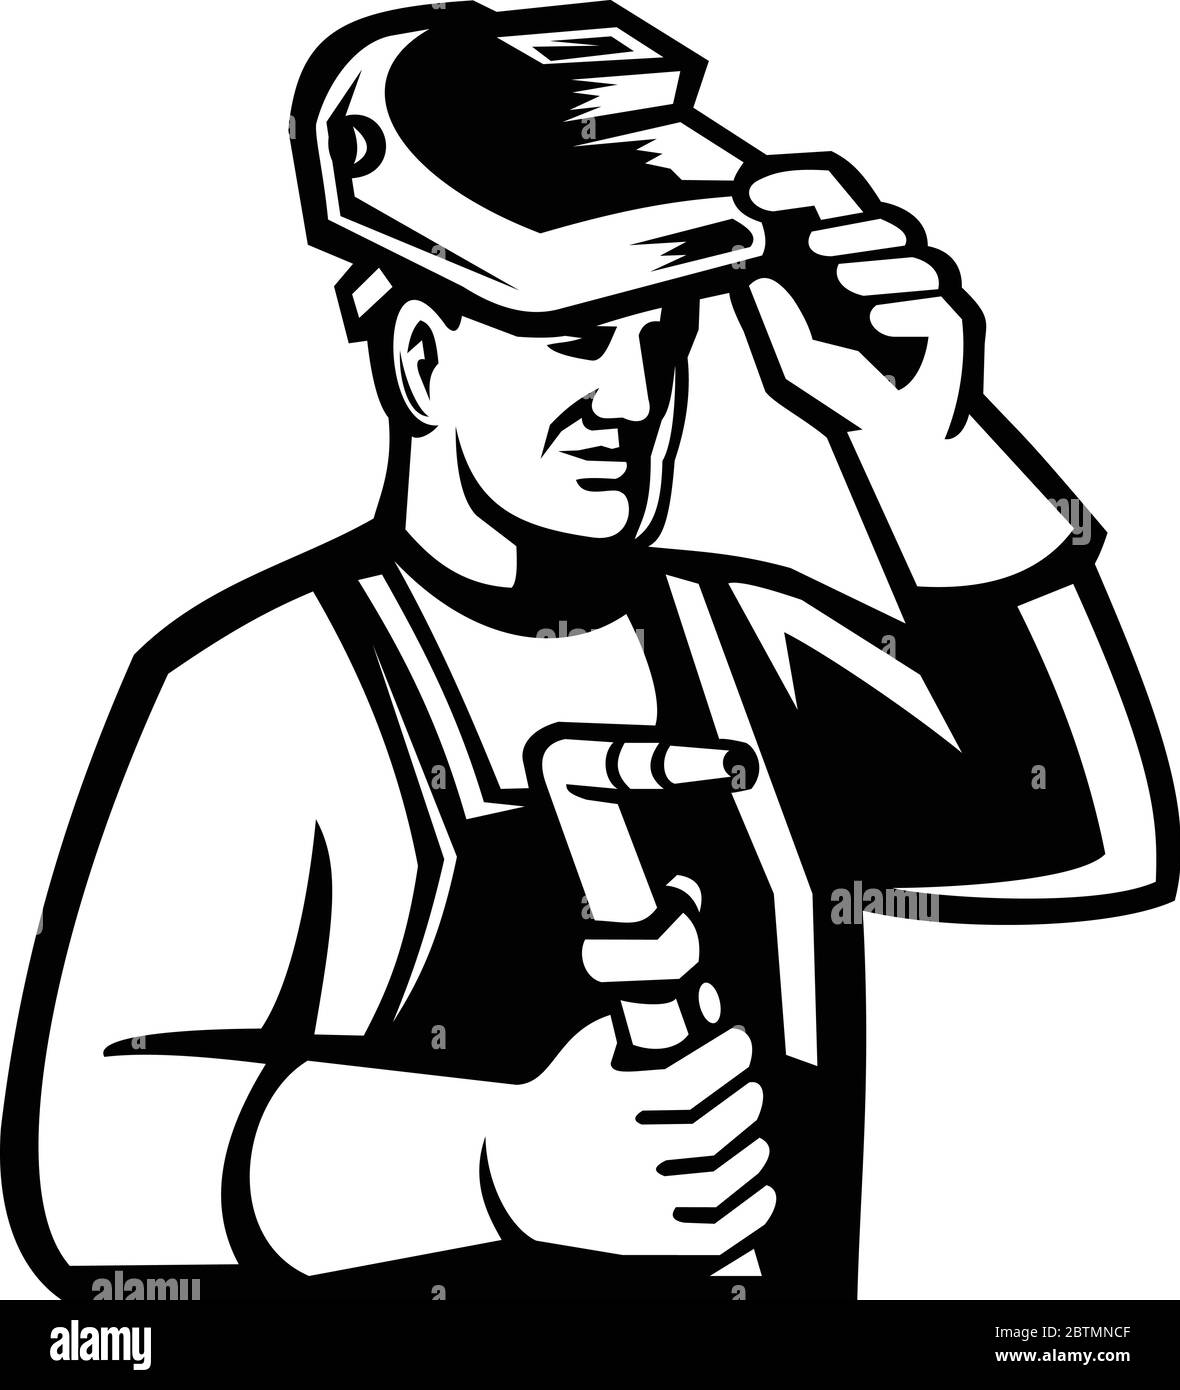 Mascot icon illustration of head of a welder lifting visor and holding welding torch viewed from side on isolated background in retro Black and White Stock Vector